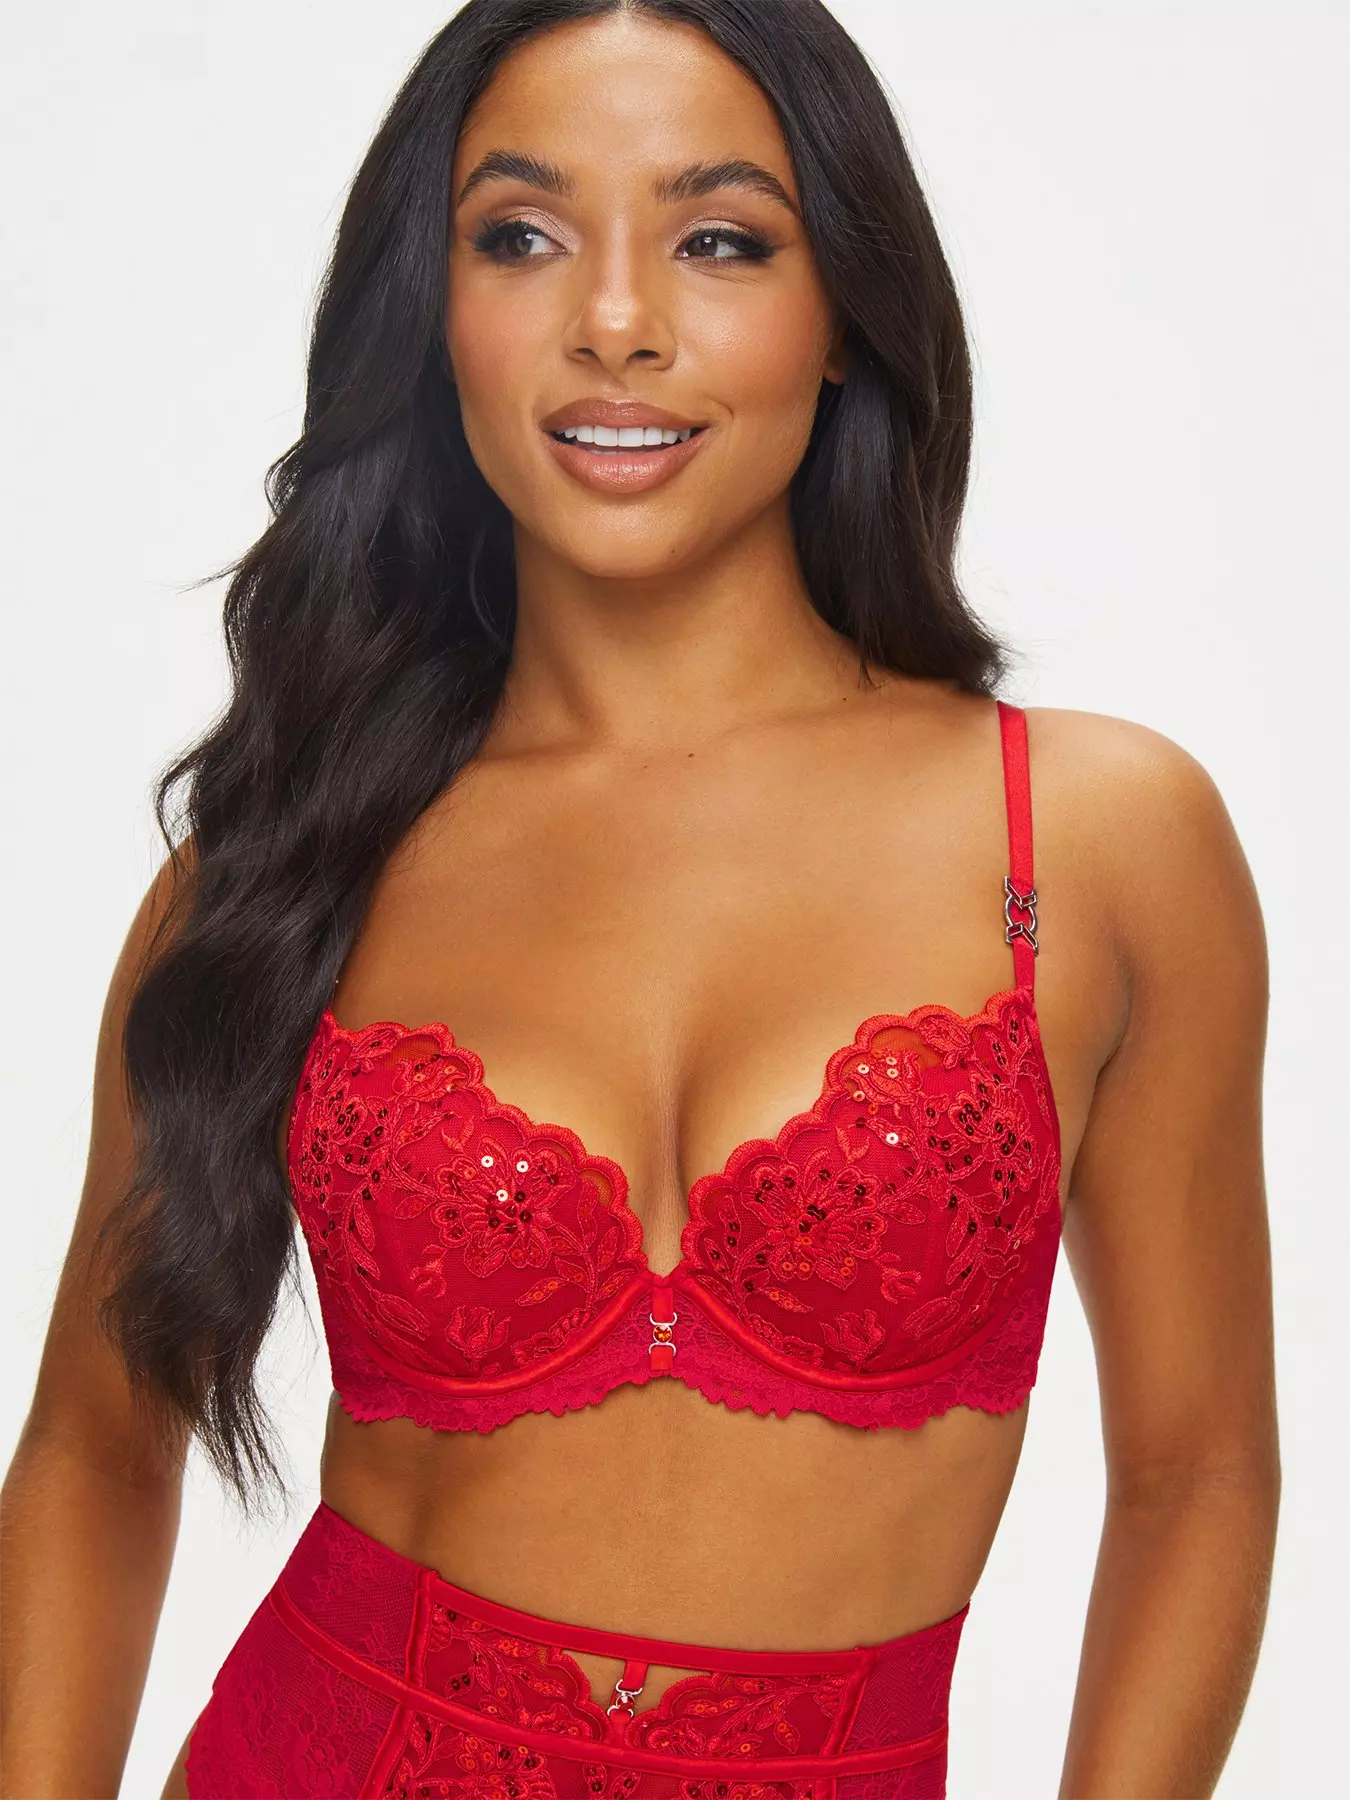 Smart & Sexy Full Figure Signature Lace Push-up Bra 2-pack No No Red/black  Hue 36dd : Target